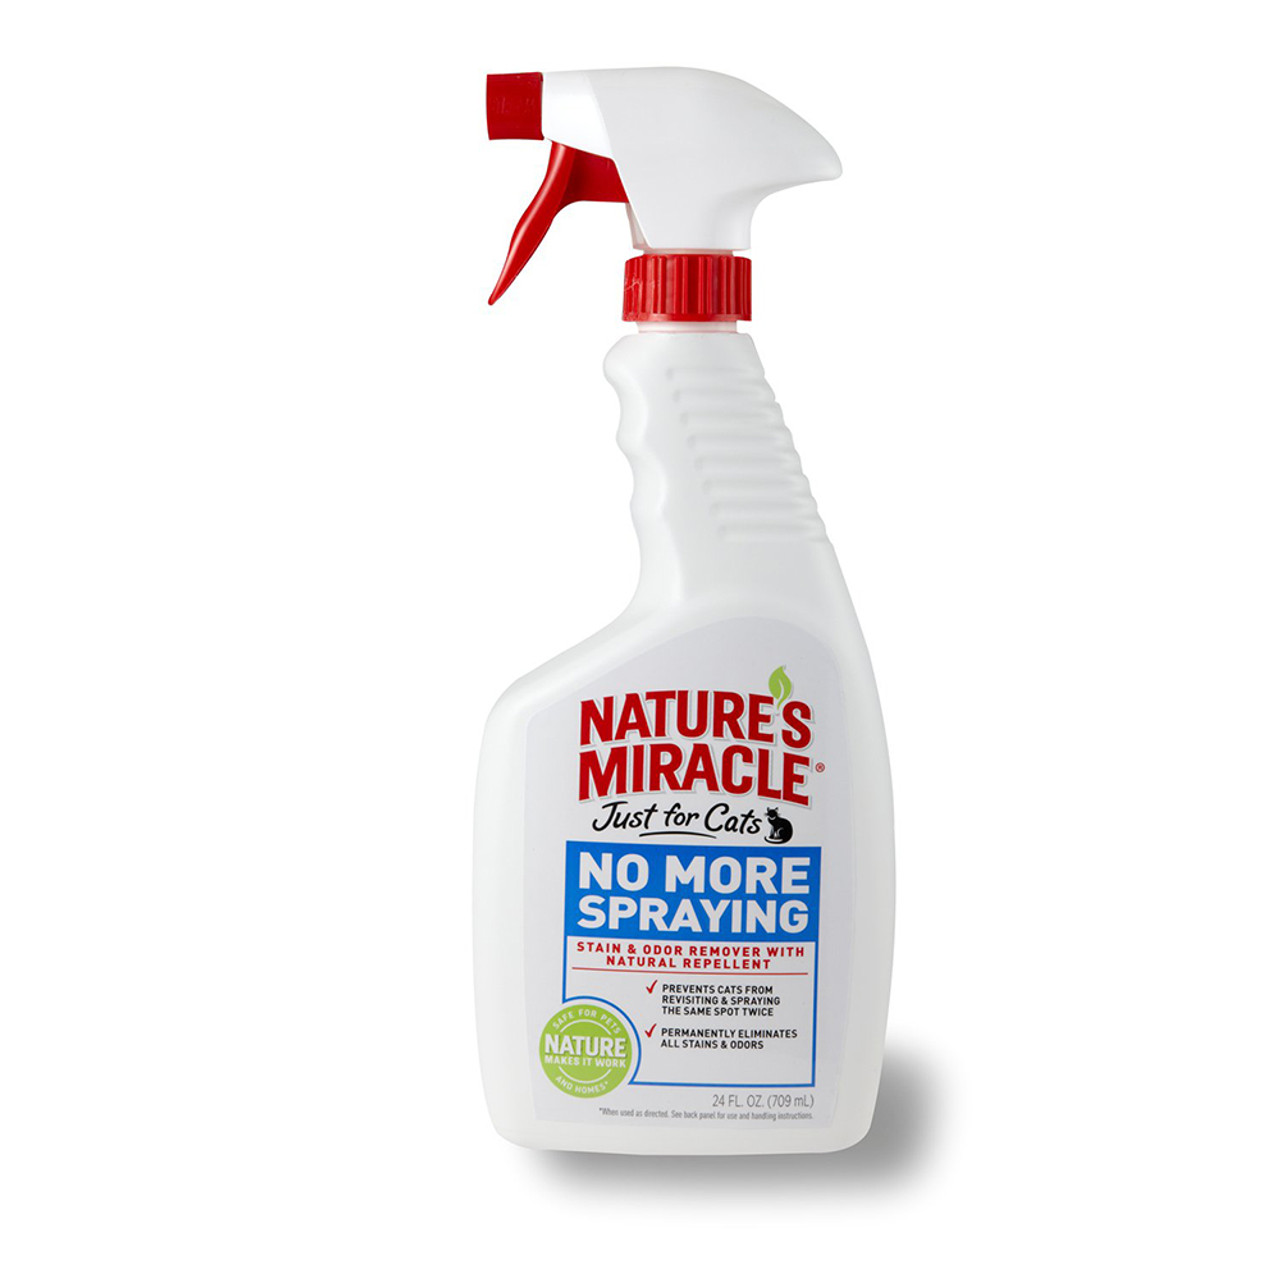 Nature's Miracle Just for Cats No More Spraying Stain & Odor Remover Spray